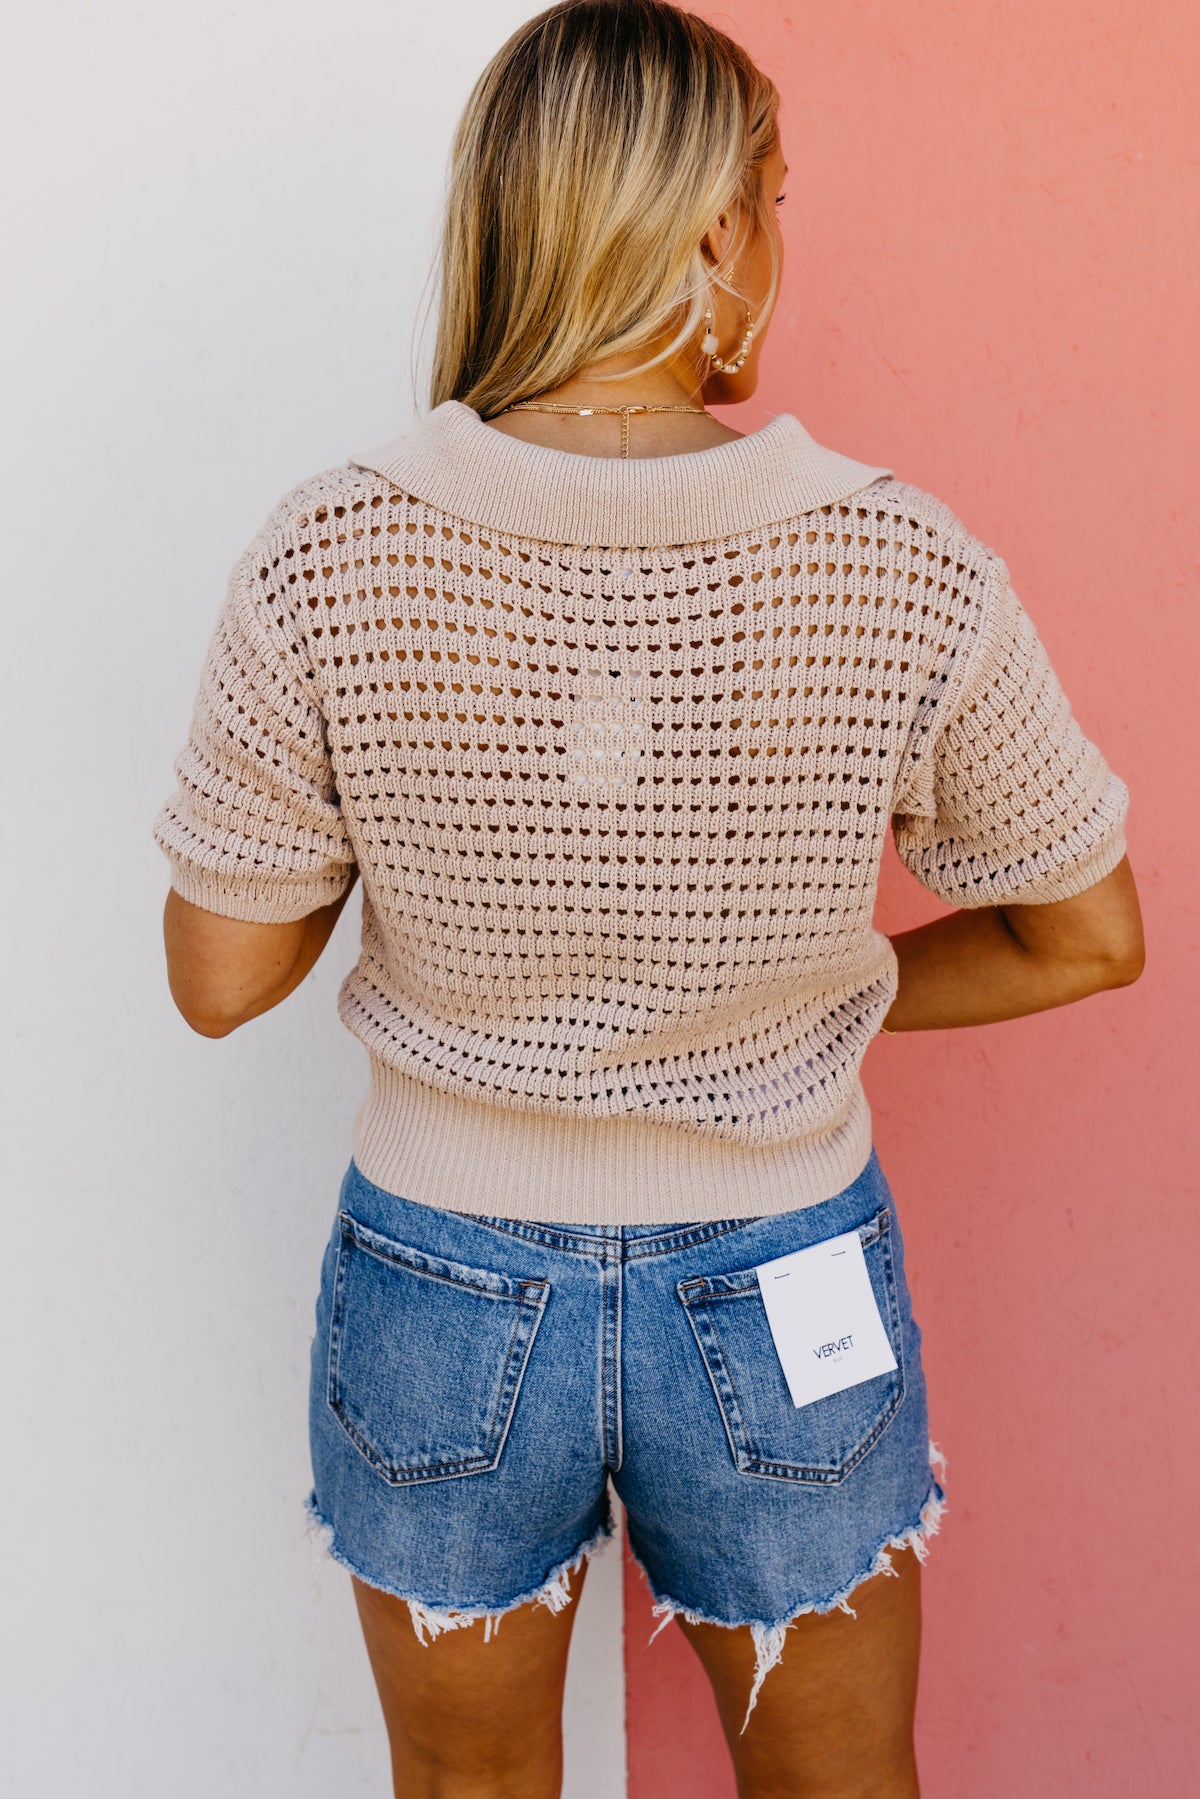 The Lilah Open Knit Sweater Top